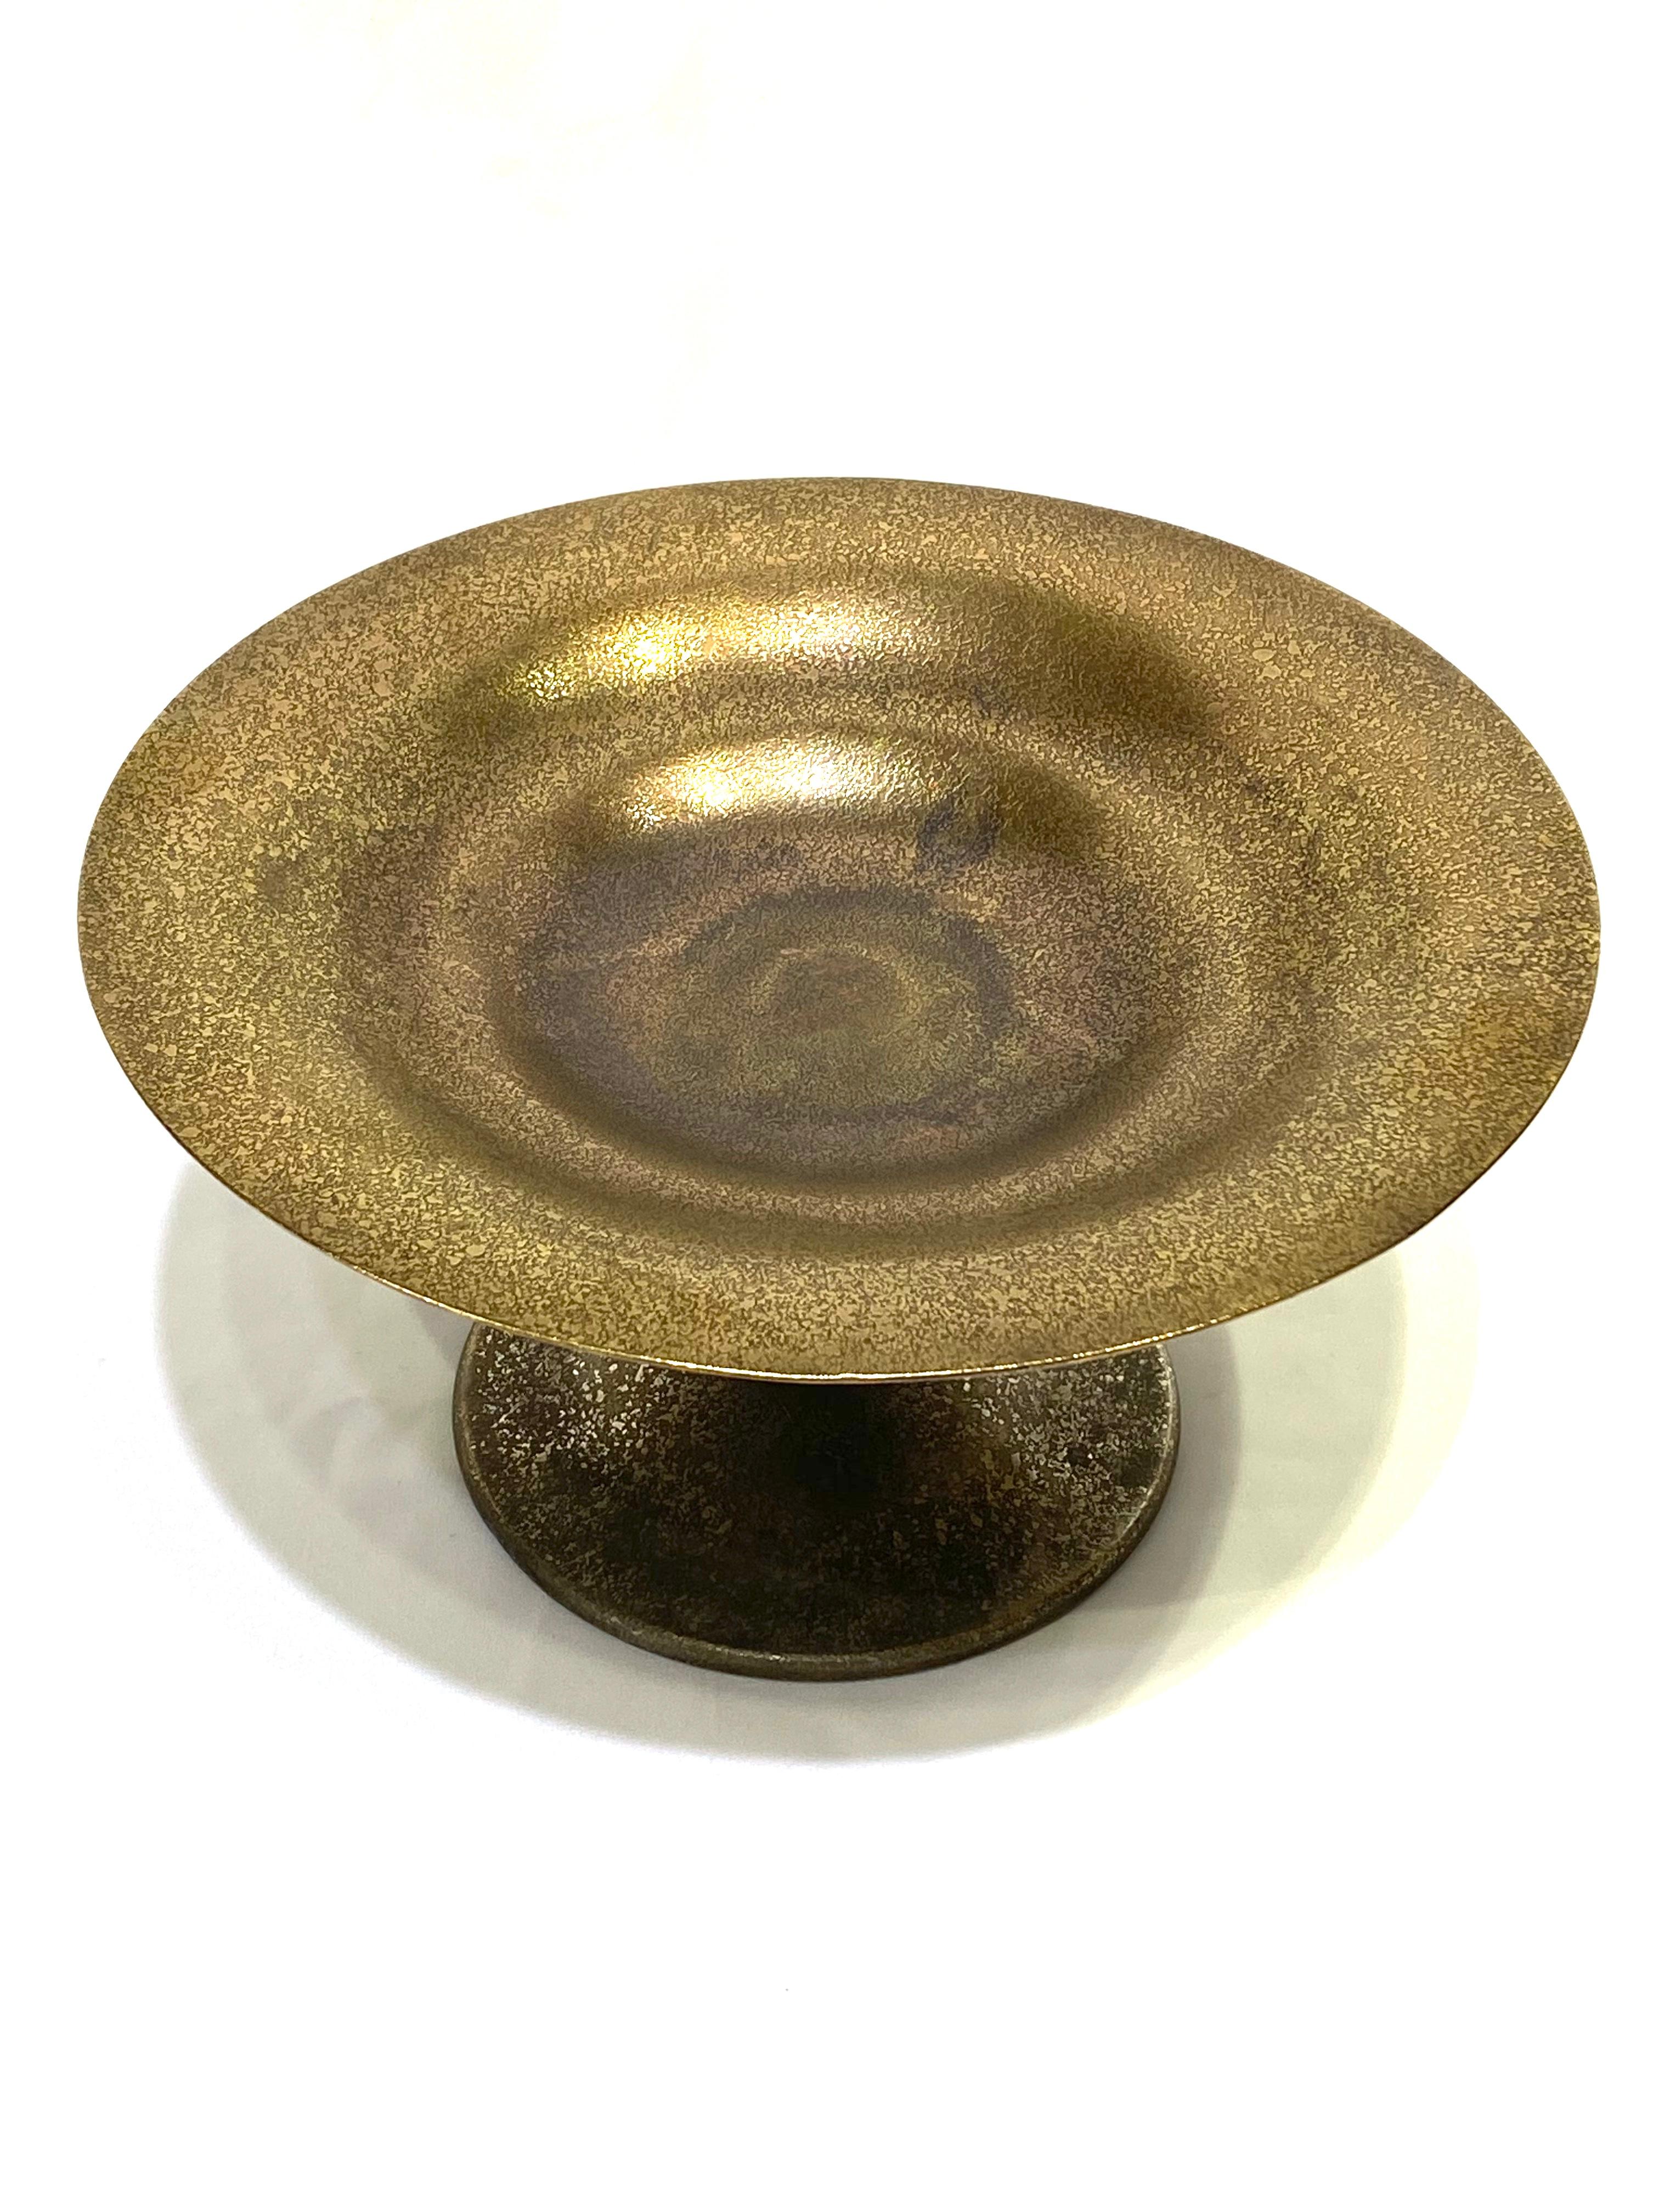 Product details:

Circa 1920- 1930
Bronze tazza, decorative dish.
Signed Tiffany Studios, New York. Numbered 1665.
Made in USA.